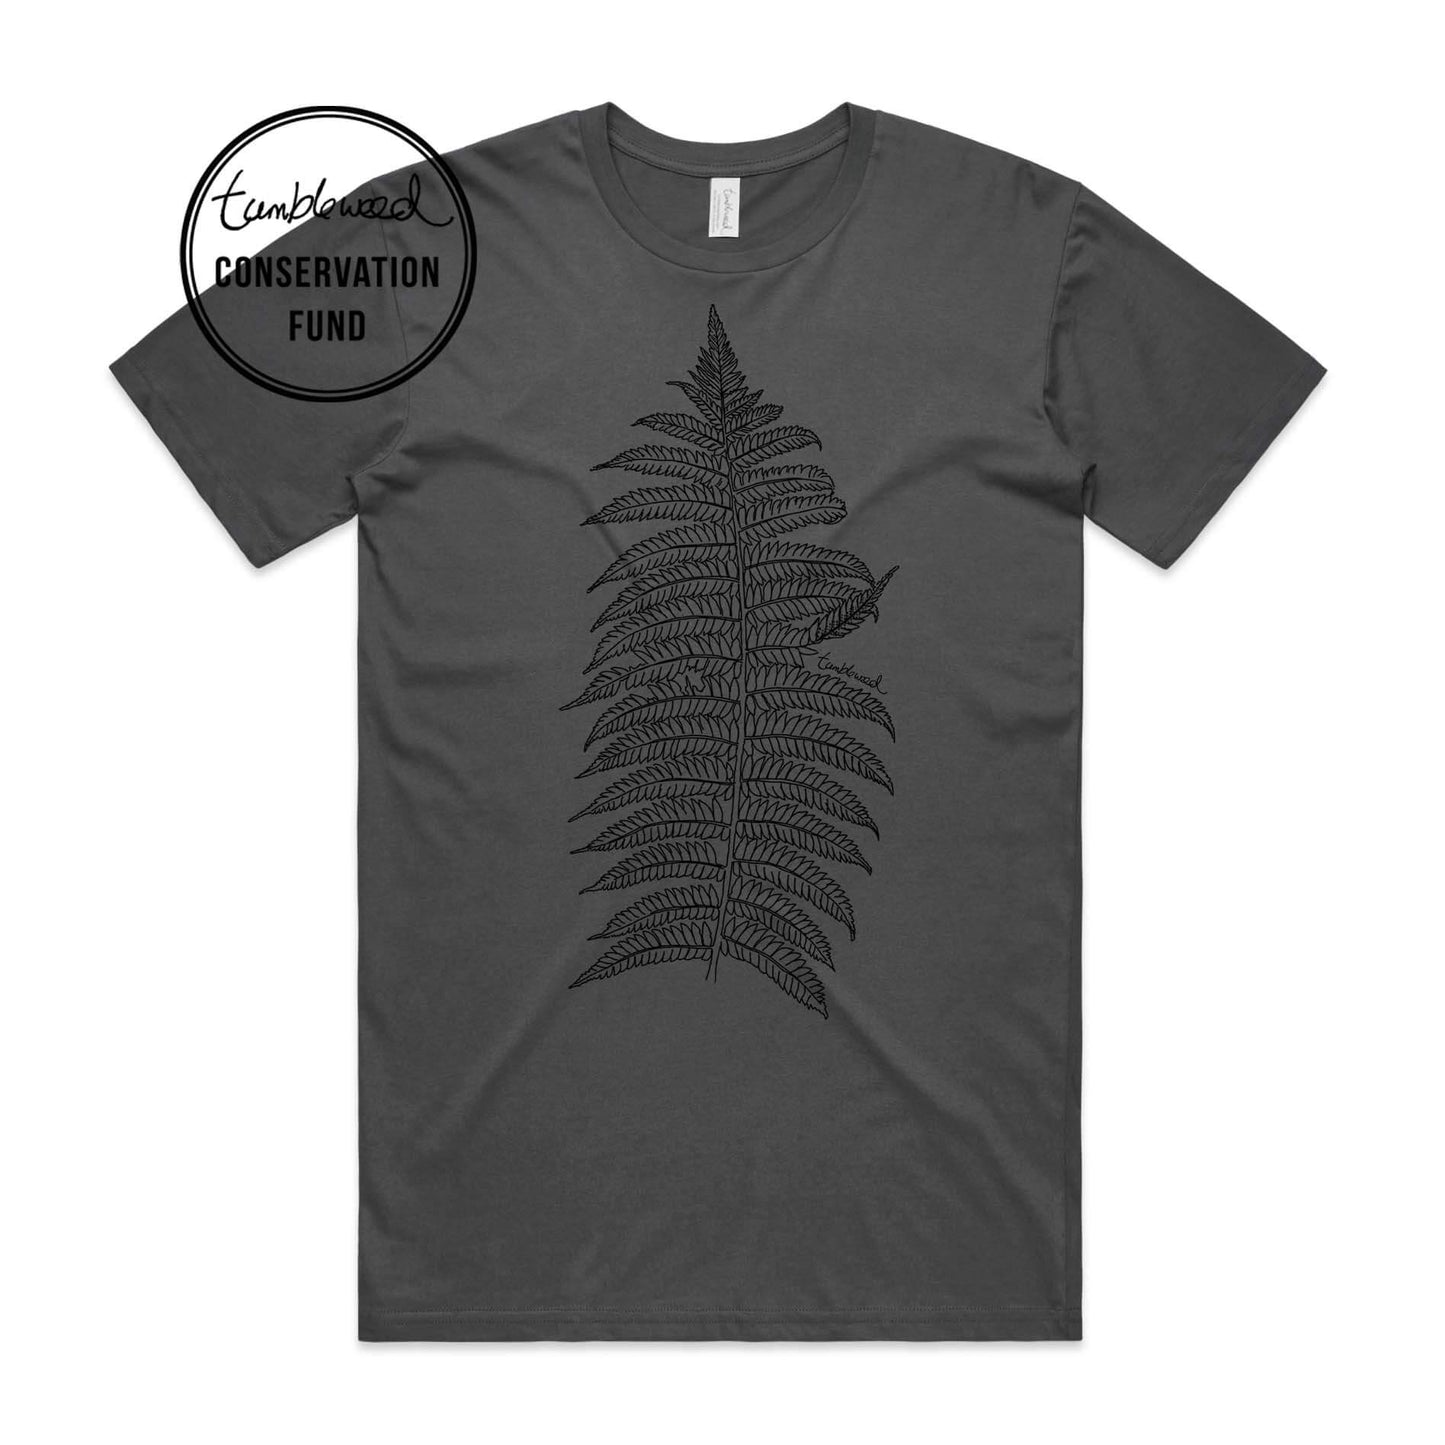 White, male t-shirt featuring a screen printed Silver fern/ponga design.